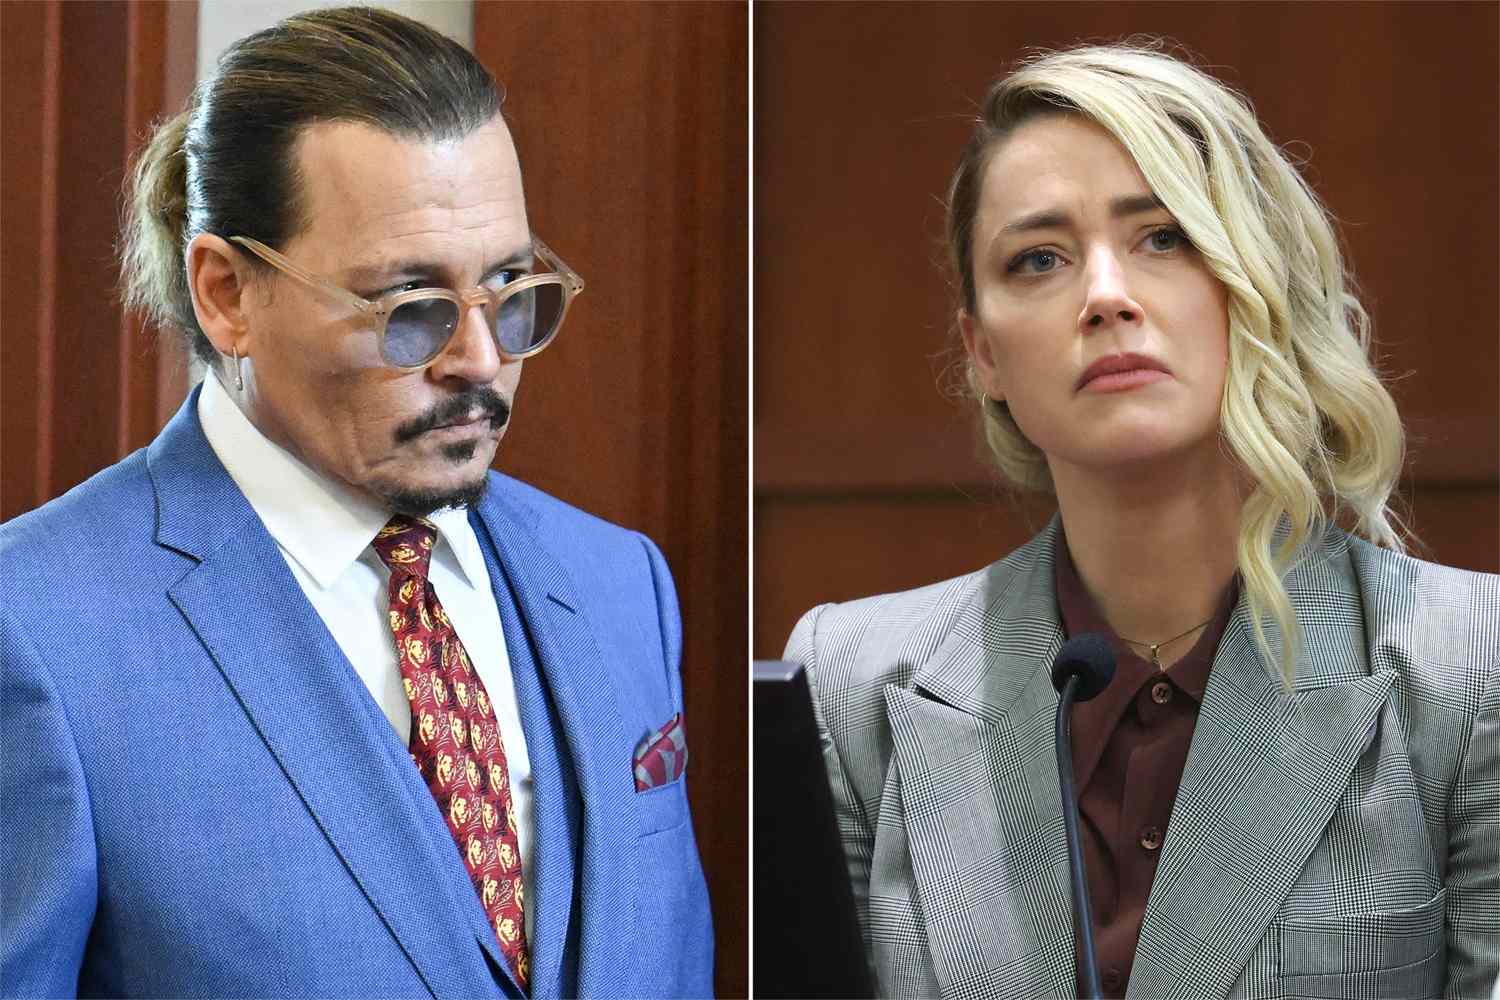 Biggest bombshells in unsealed Johnny Depp v. Amber Heard court docs: Erectile dysfunction, nude photos, and Marilyn Manson